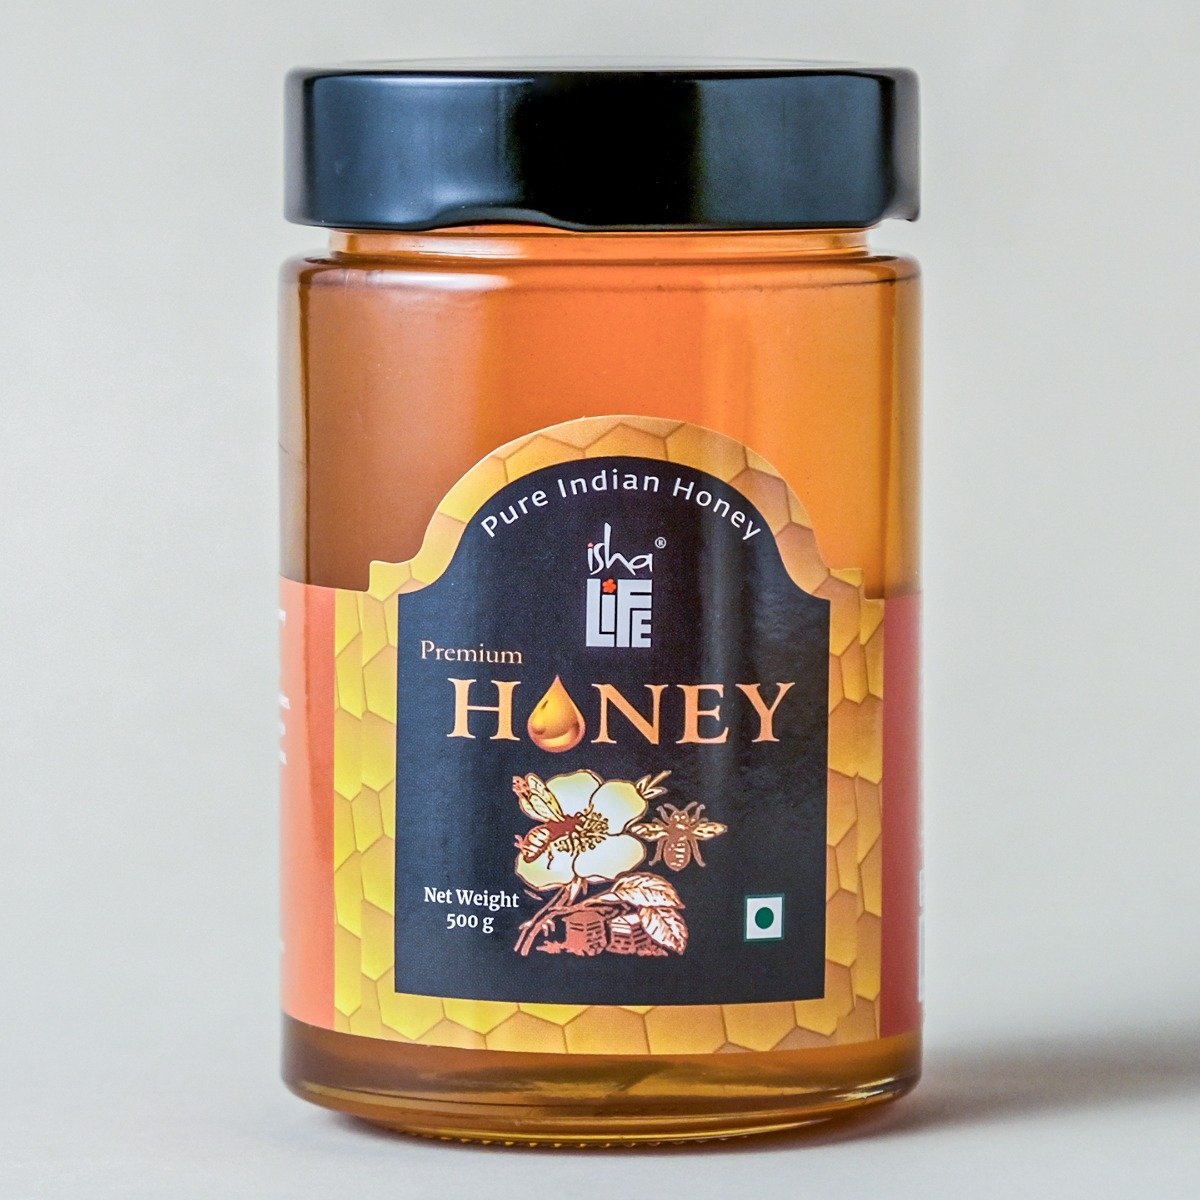 Natural Honey Love Body Lotion - Price in India, Buy Natural Honey Love  Body Lotion Online In India, Reviews, Ratings & Features